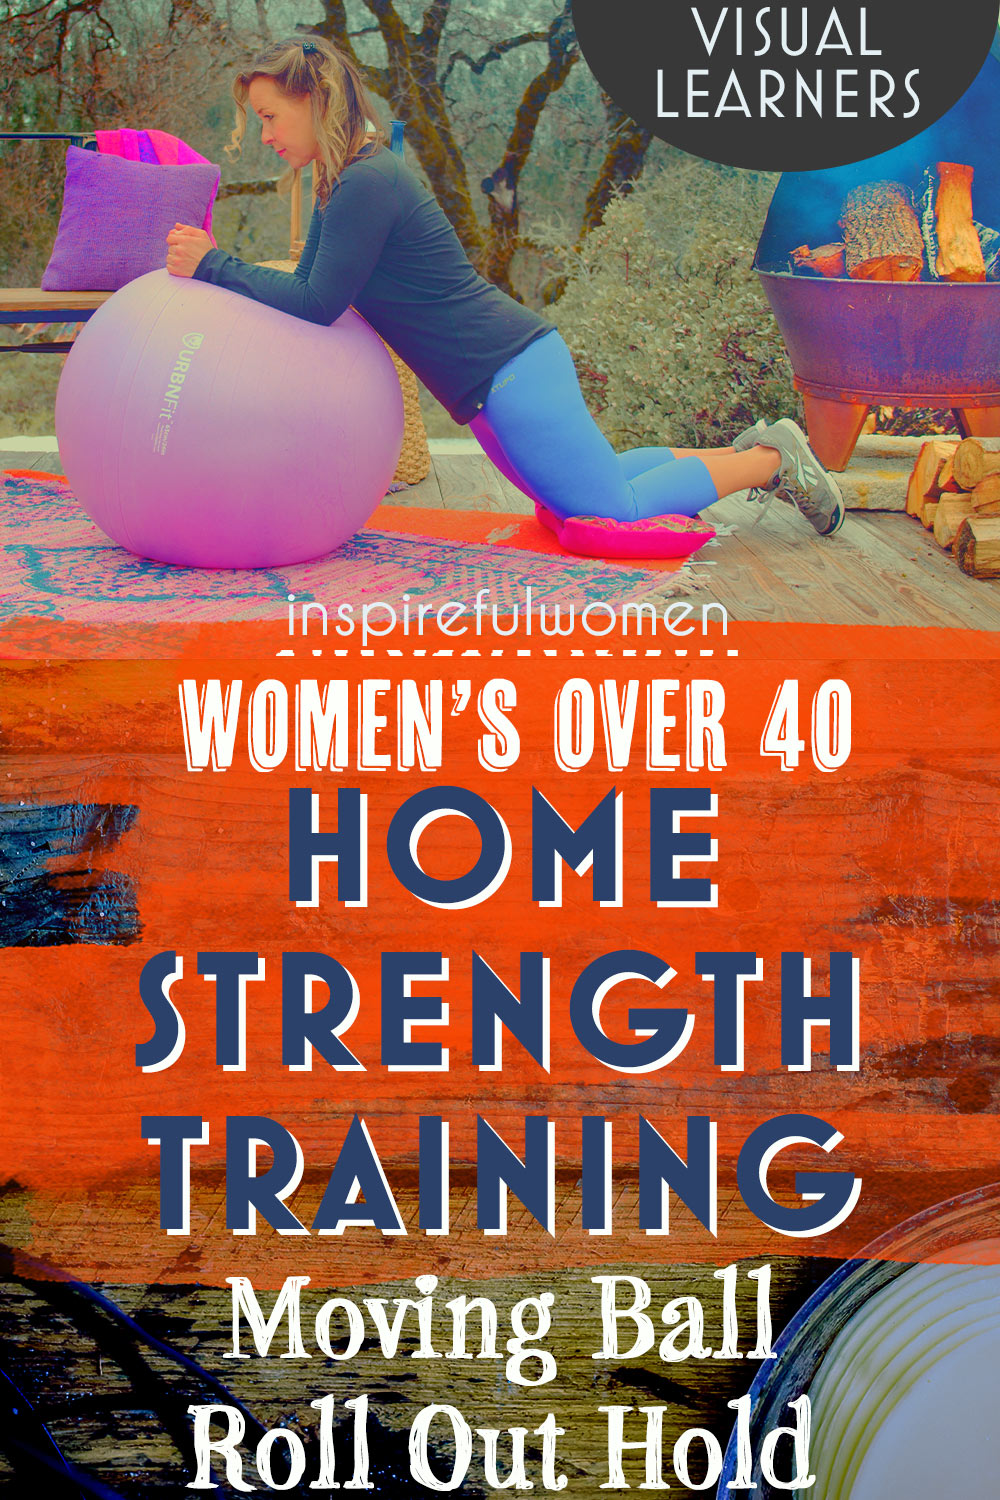 moving-ball-rollout-hold-knee-plank-buzz-saw-stomach-core-ab-exercise-women-40+